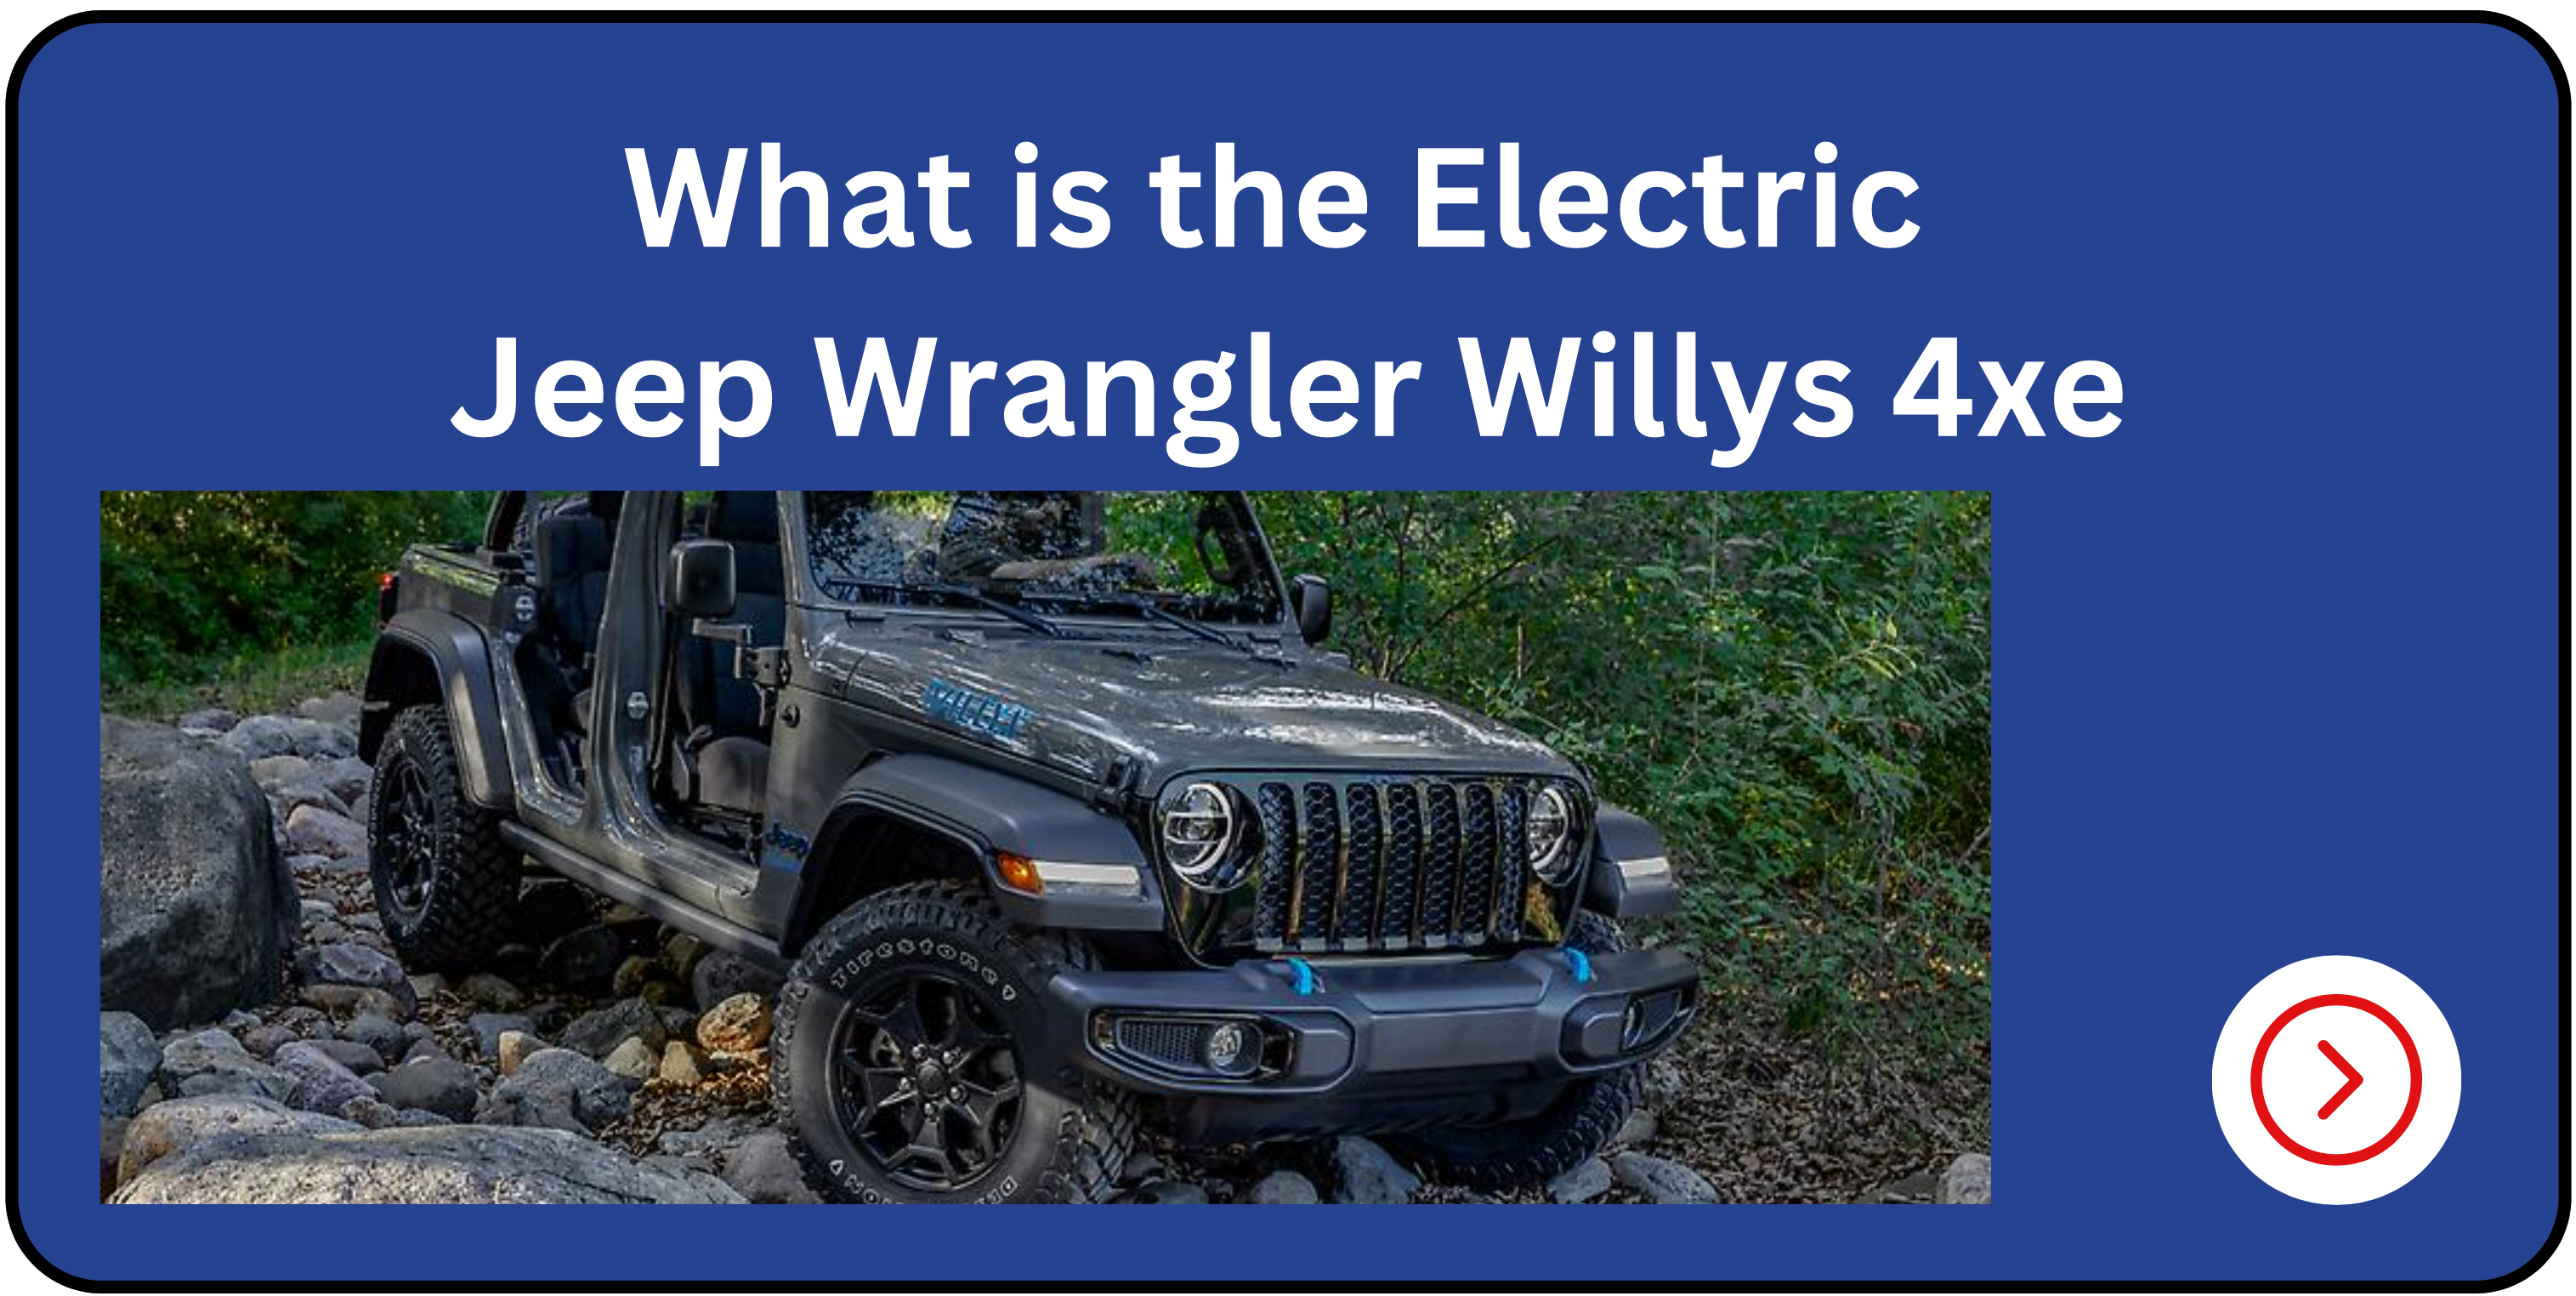 What is the Electric Jeep Wrangler Willys 4xe